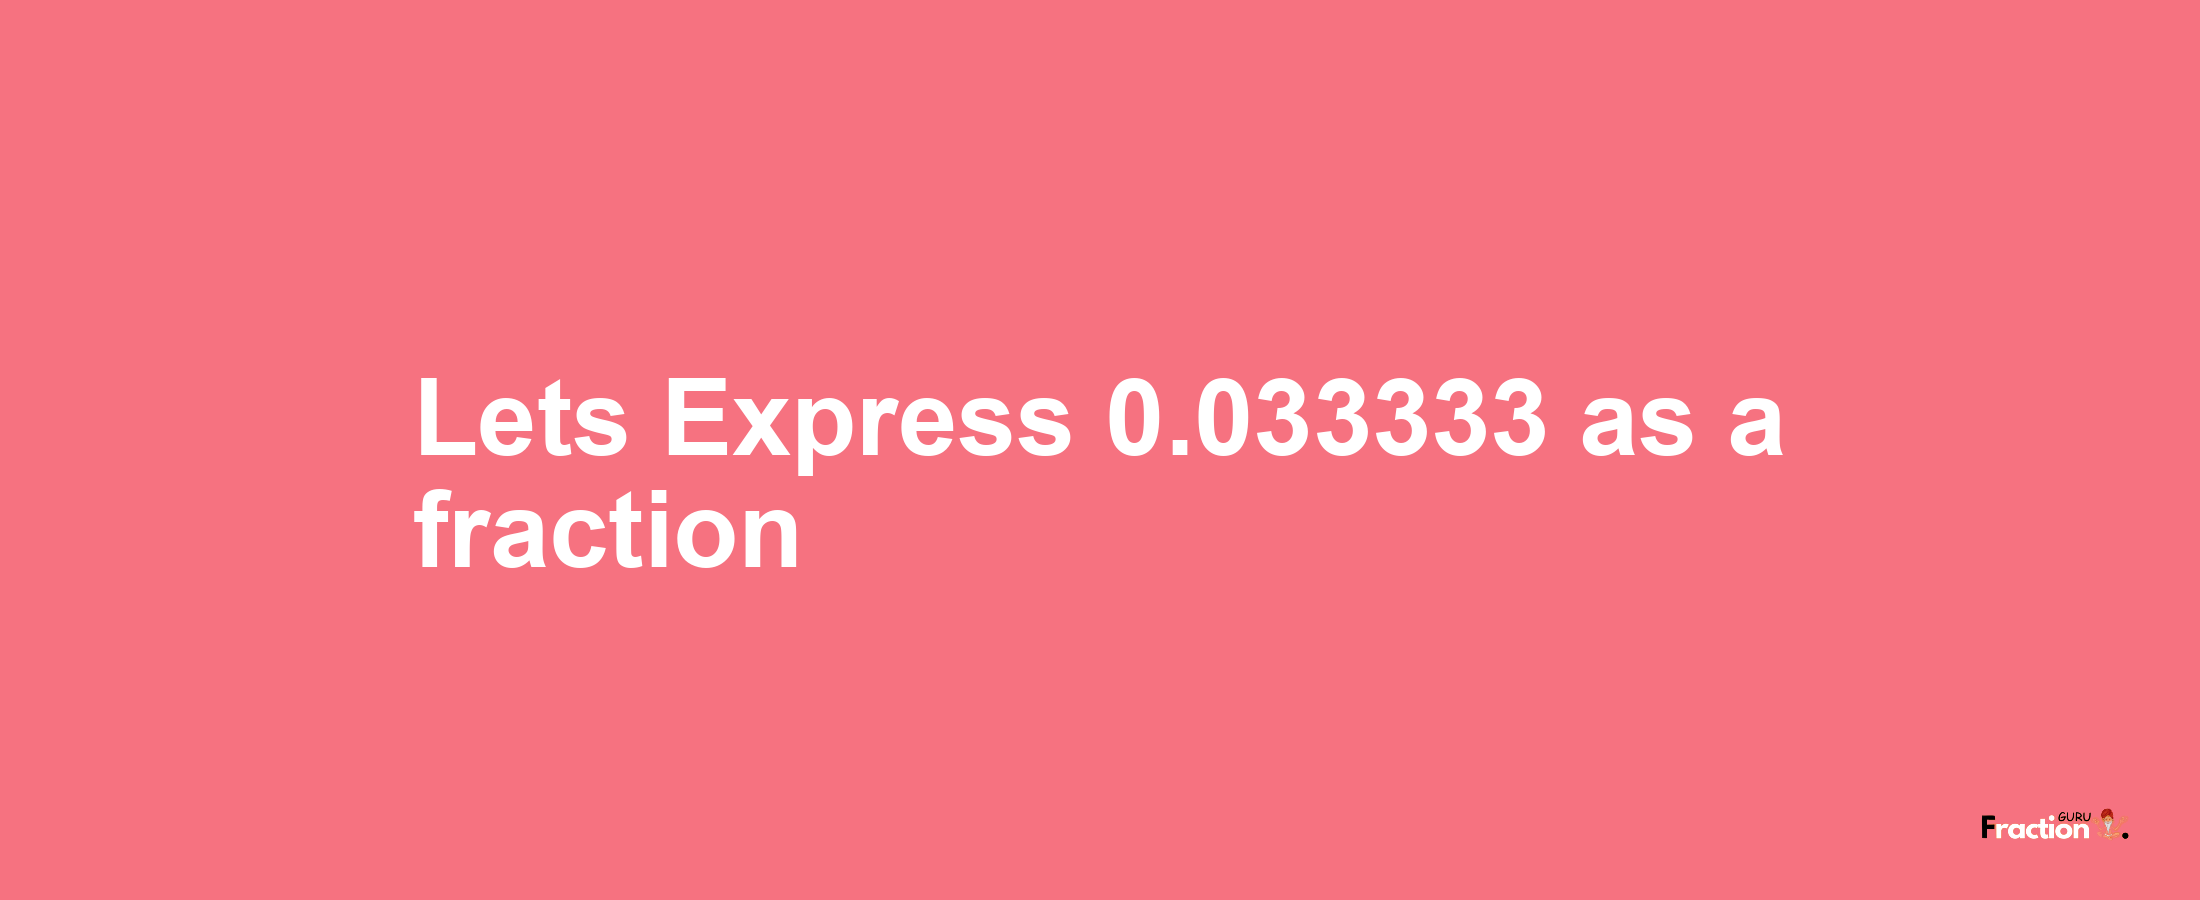 Lets Express 0.033333 as afraction